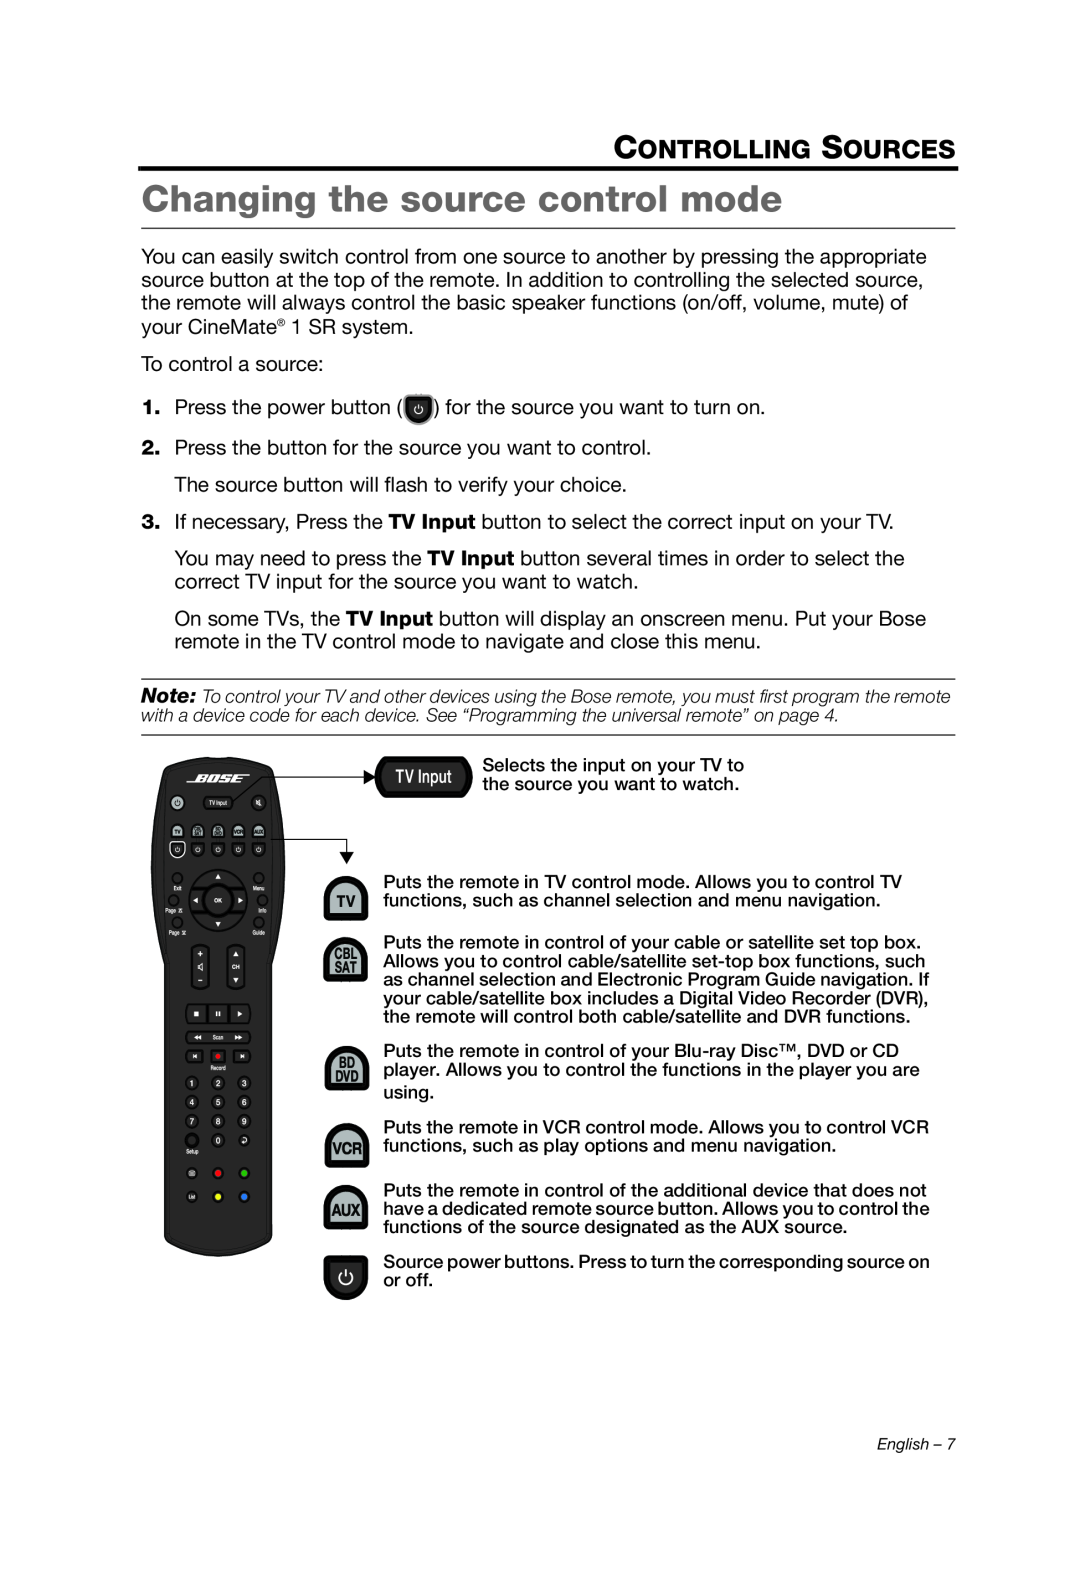 Bose 1 SR manual Changing the source control mode, Controlling Sources 